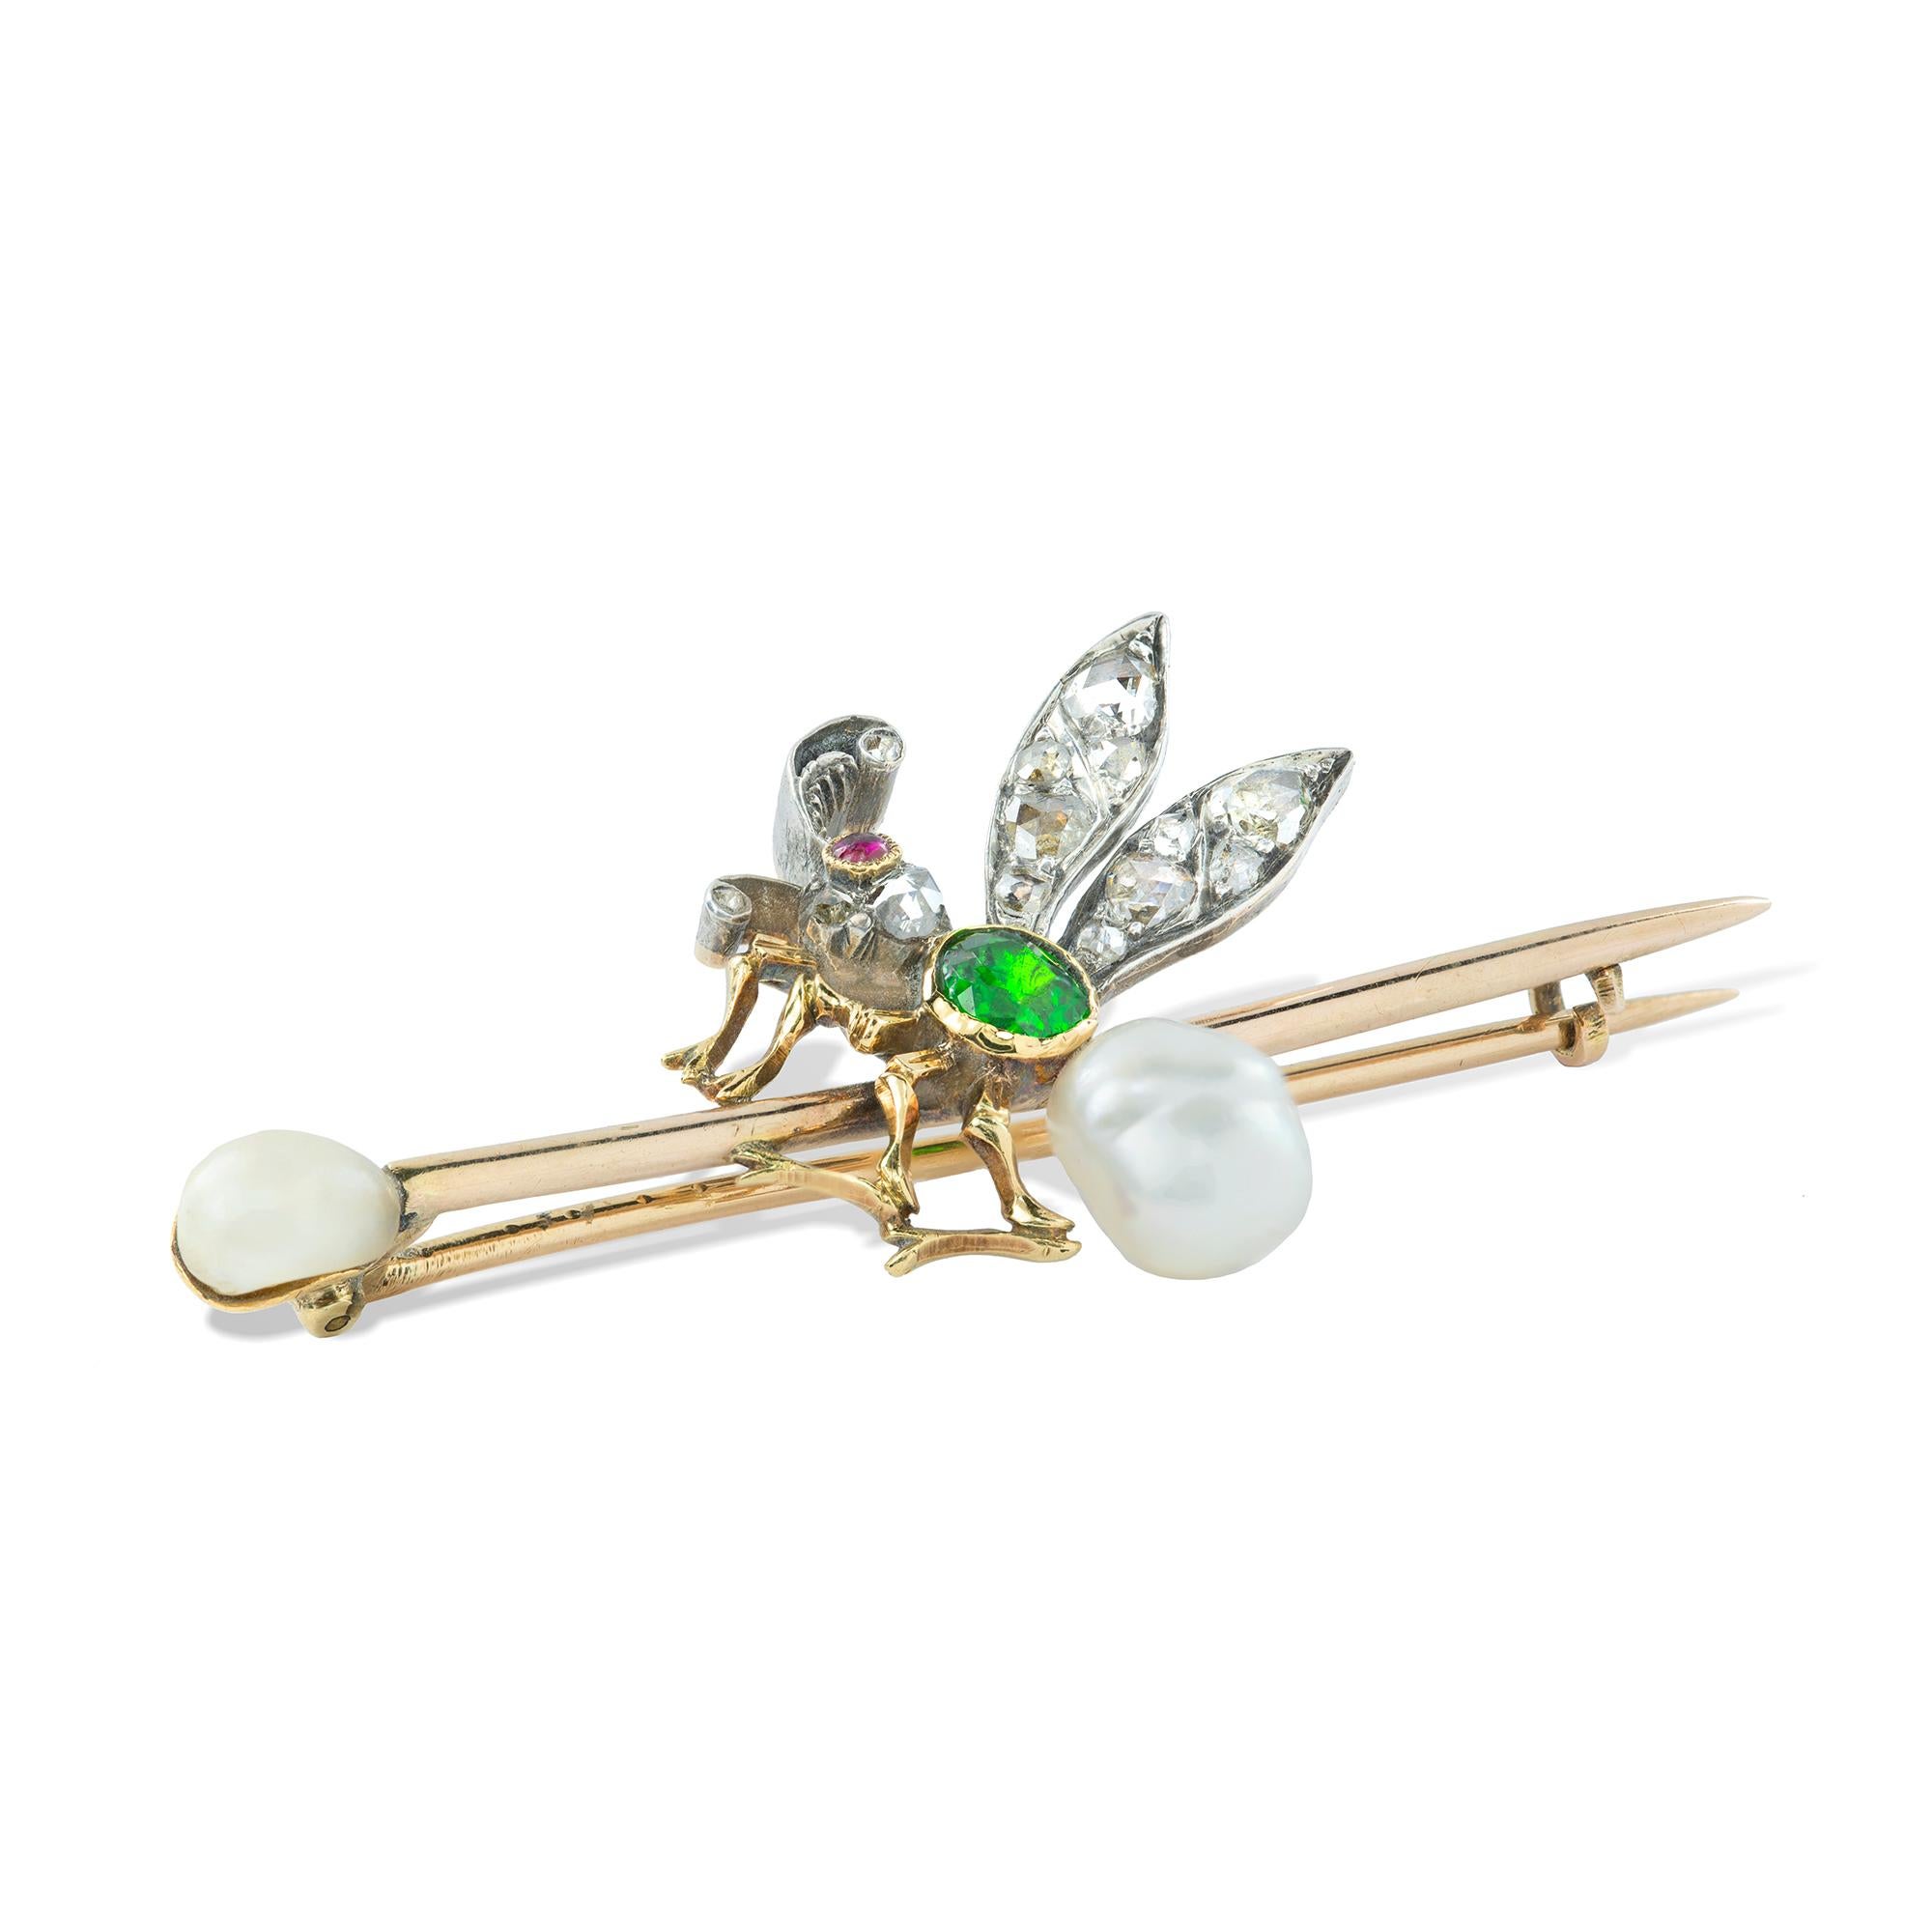 A late 19th century fly brooch, the bee set with a dementoid garnet, a ruby eye, diamond wings and a pearl body, set in silver and gold, with a further pearl to the gold bar brooch, circa 1890, measuring approximately 2.2x5.4cm, gross weight